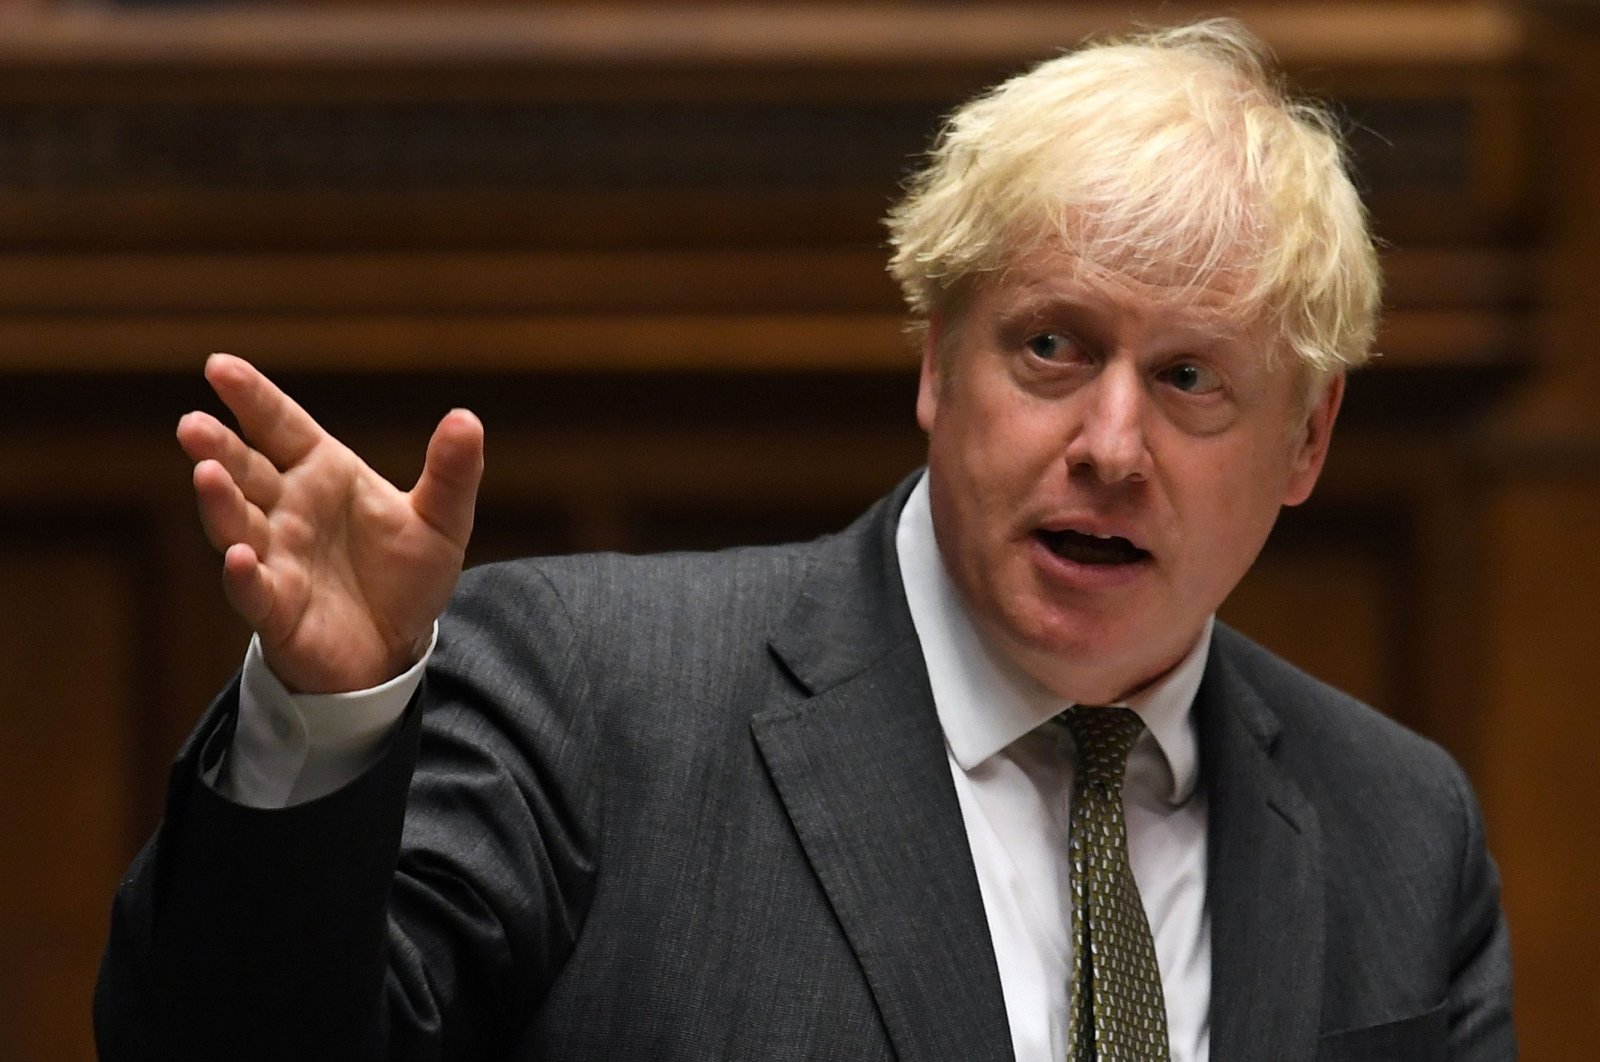 British Prime Minister Boris Johnson speaks during Prime Minister's Questions (PMQs) in the House of Commons, London, Britain, Sept. 23, 2020. (AFP Photo)